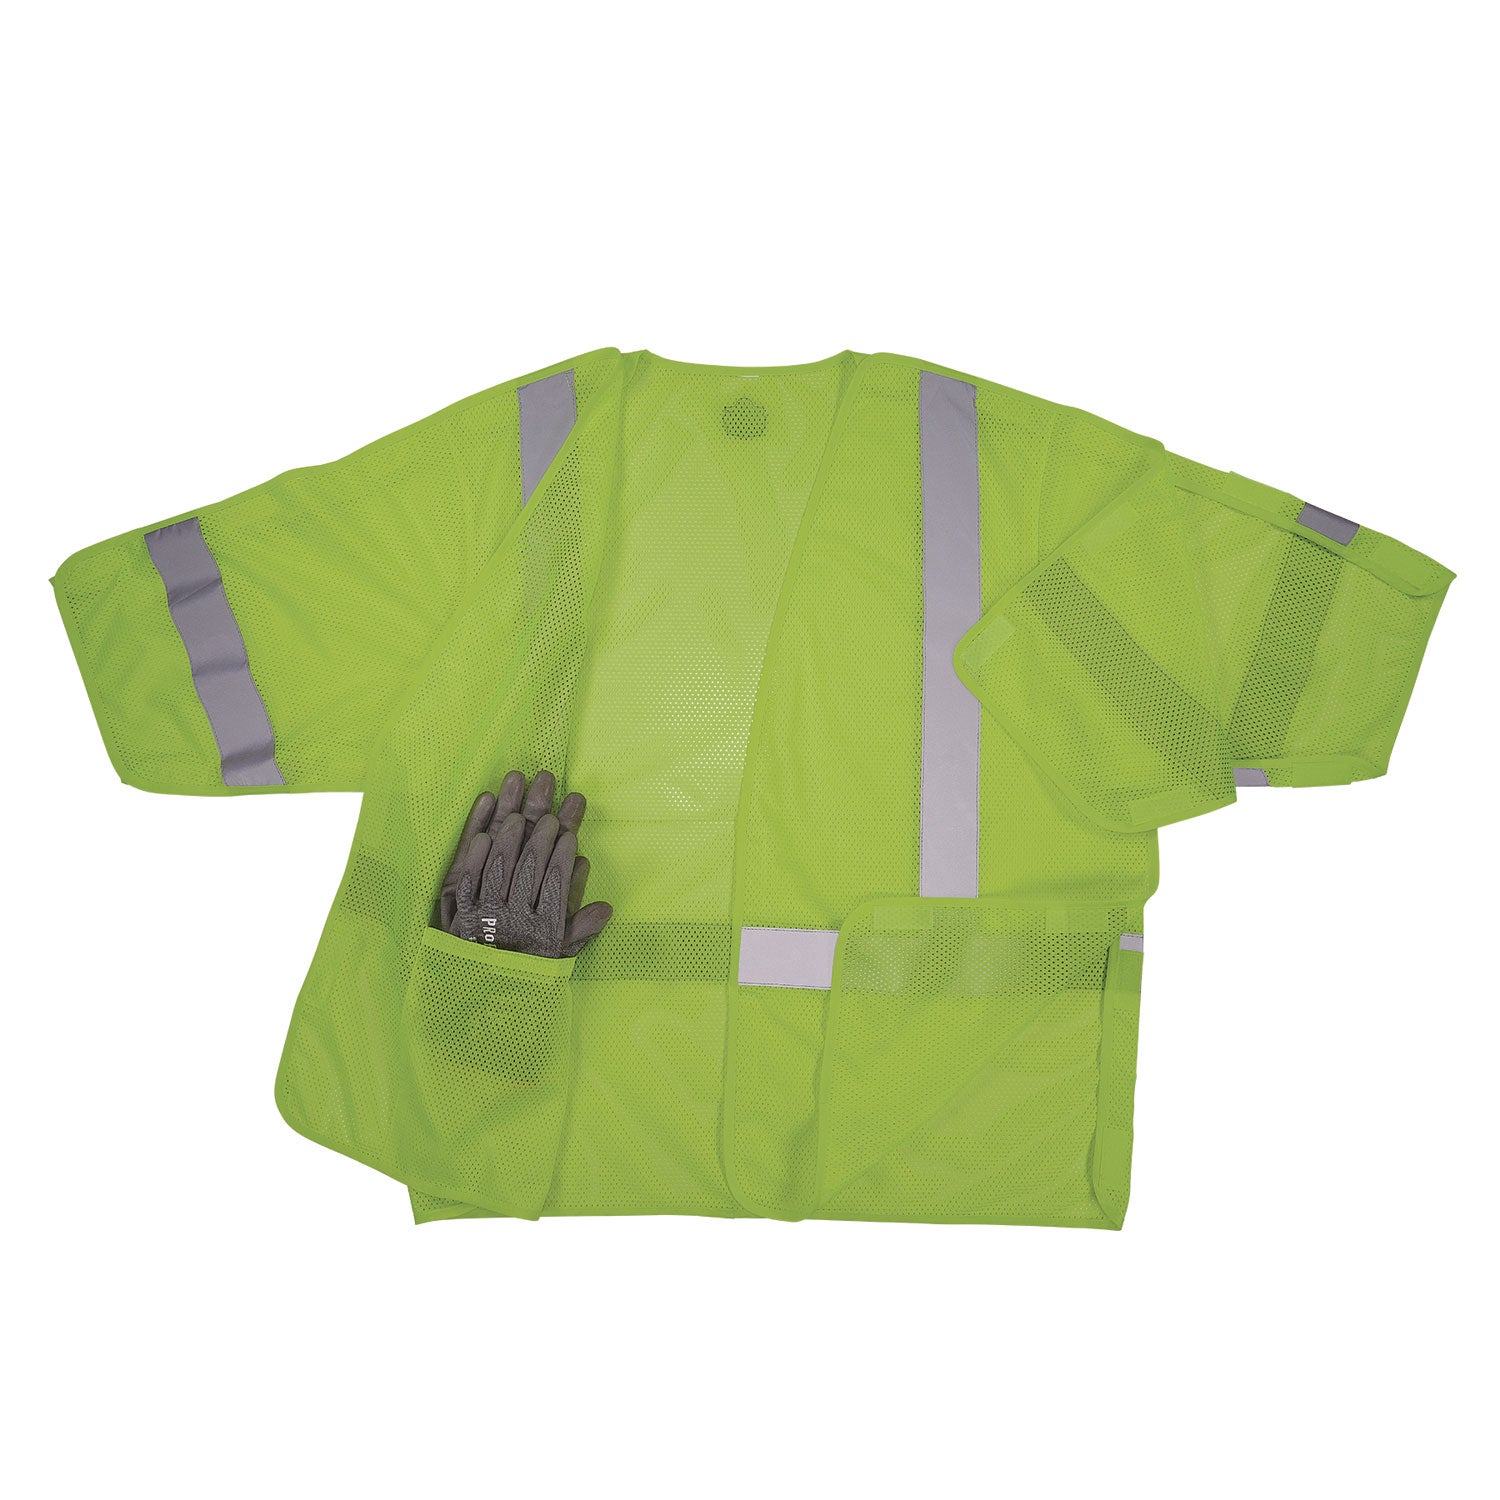 glowear-8315ba-class-3-hi-vis-breakaway-safety-vest-large-to-x-large-lime-ships-in-1-3-business-days_ego23055 - 2